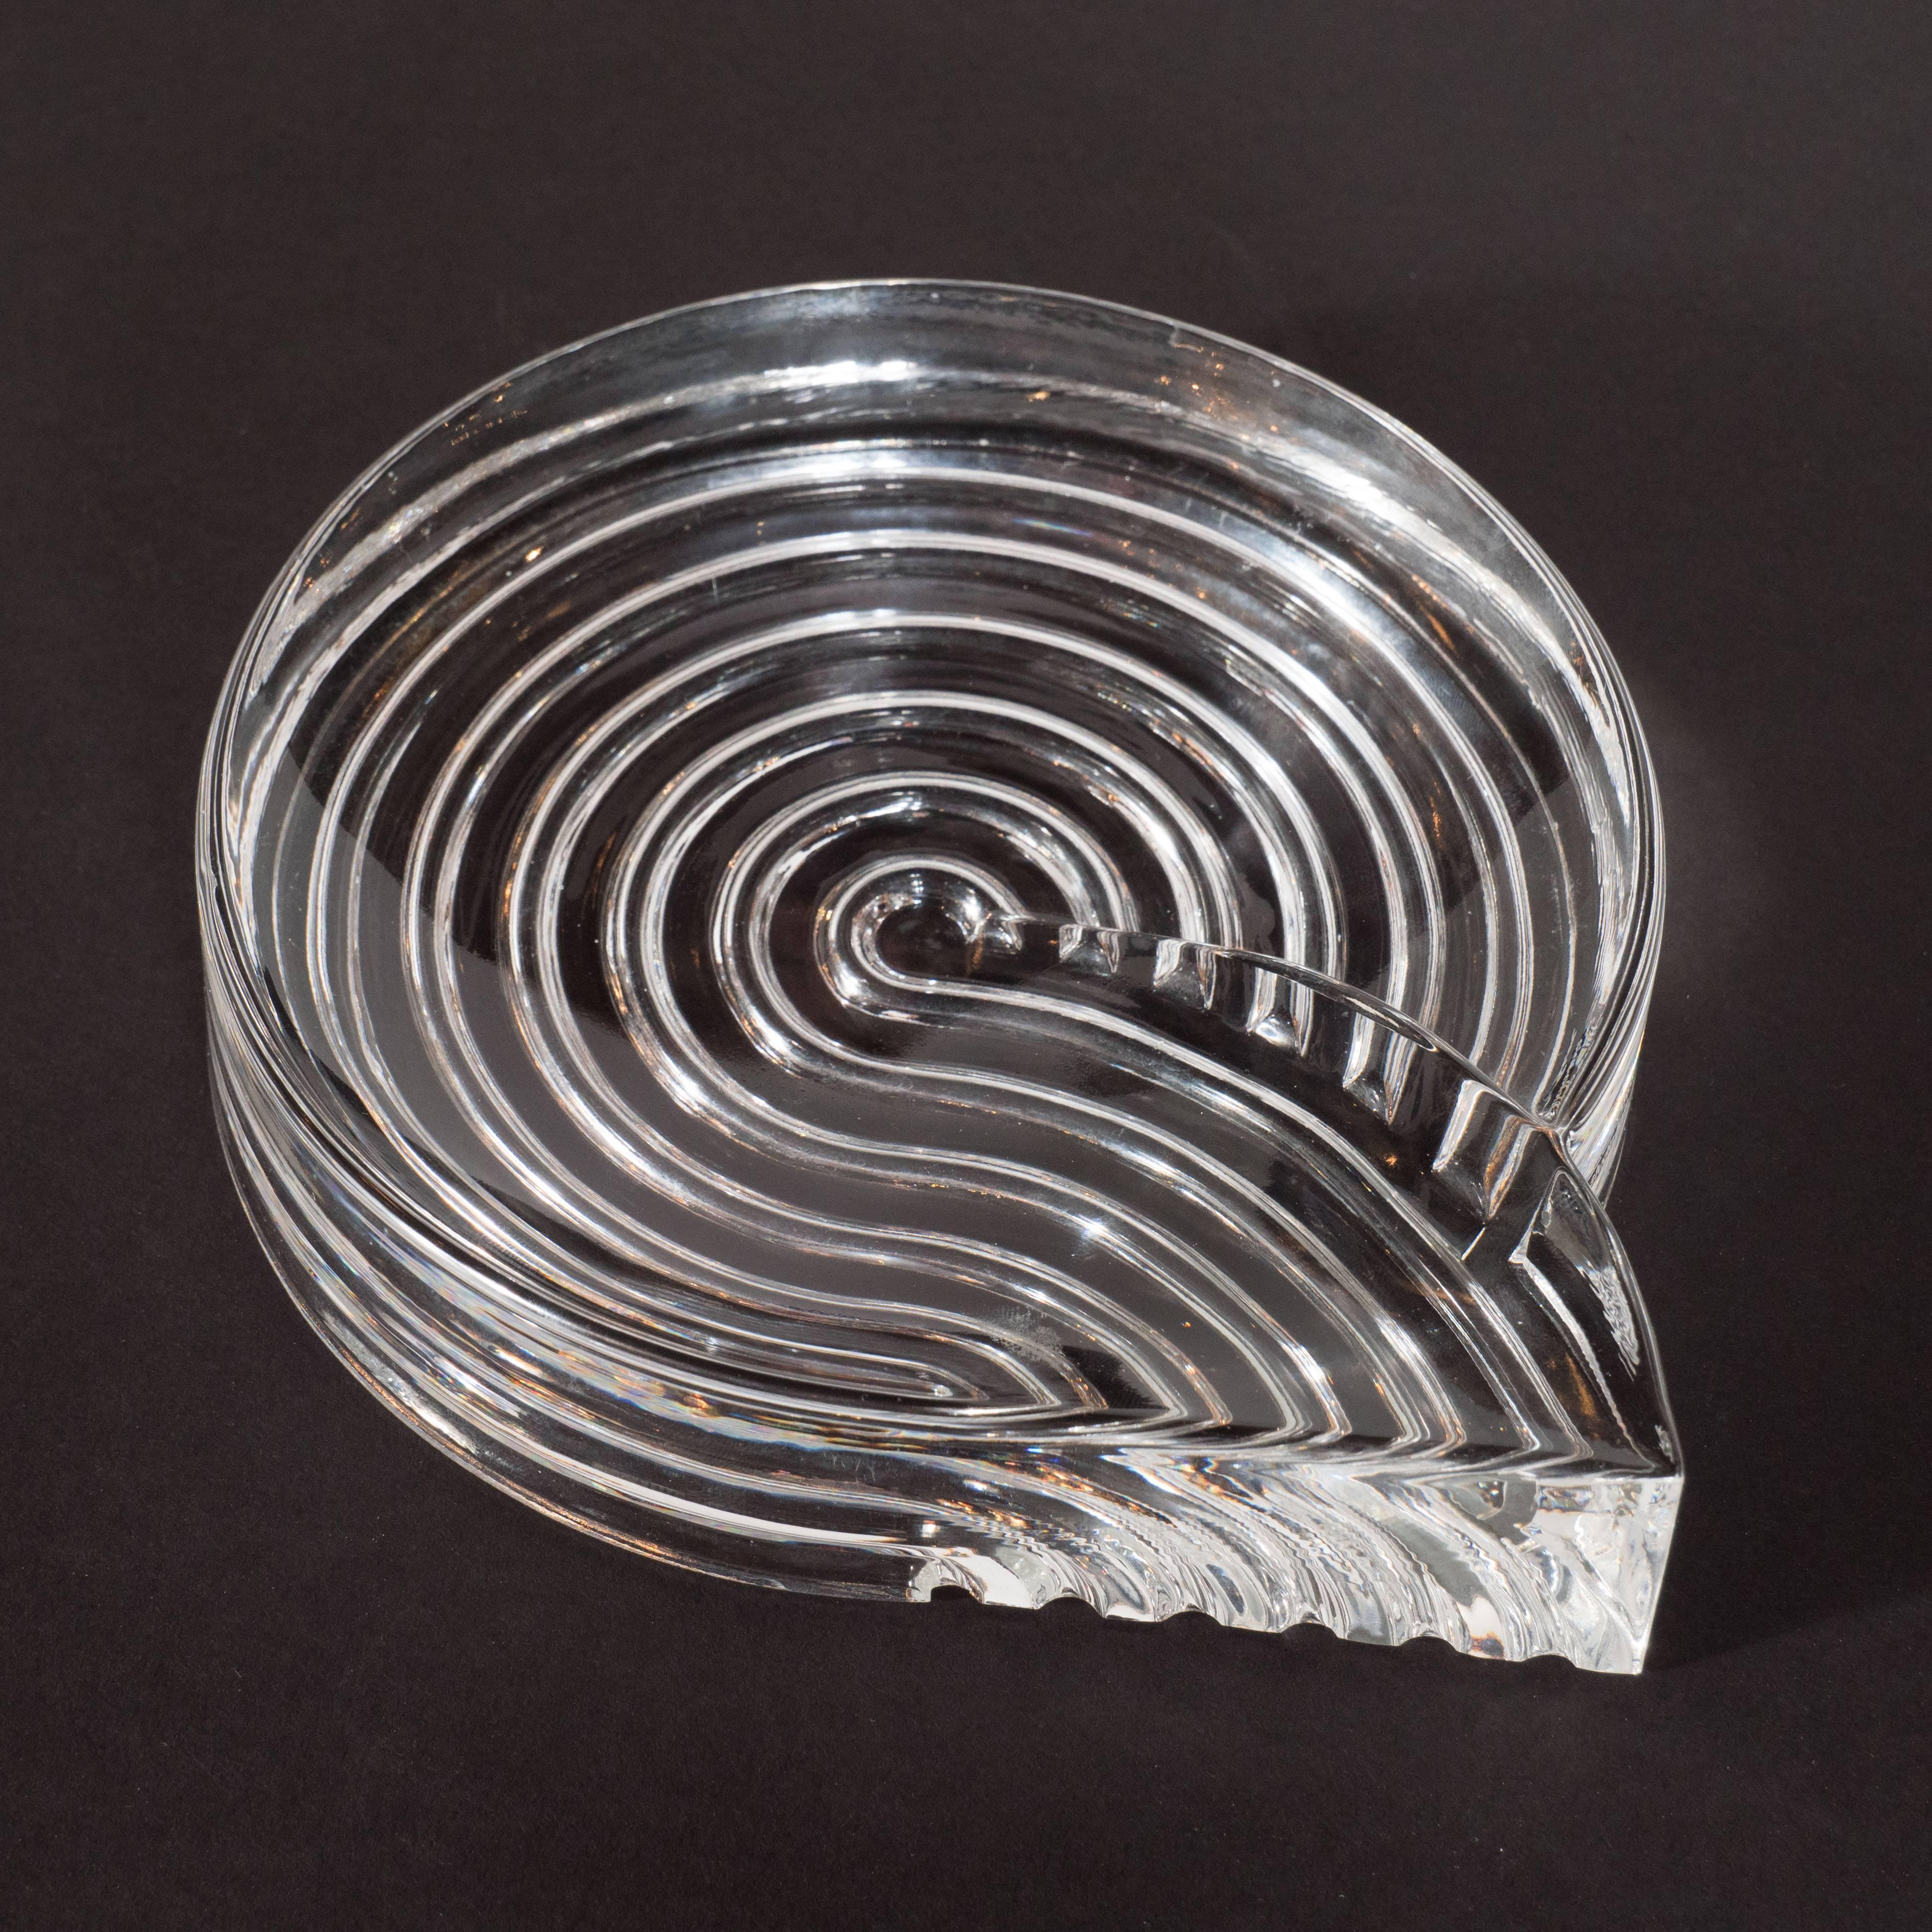 Late 20th Century Signed Mid-Century Modern Glass Ashtray Dish by Natale Sapone for Rosenthal